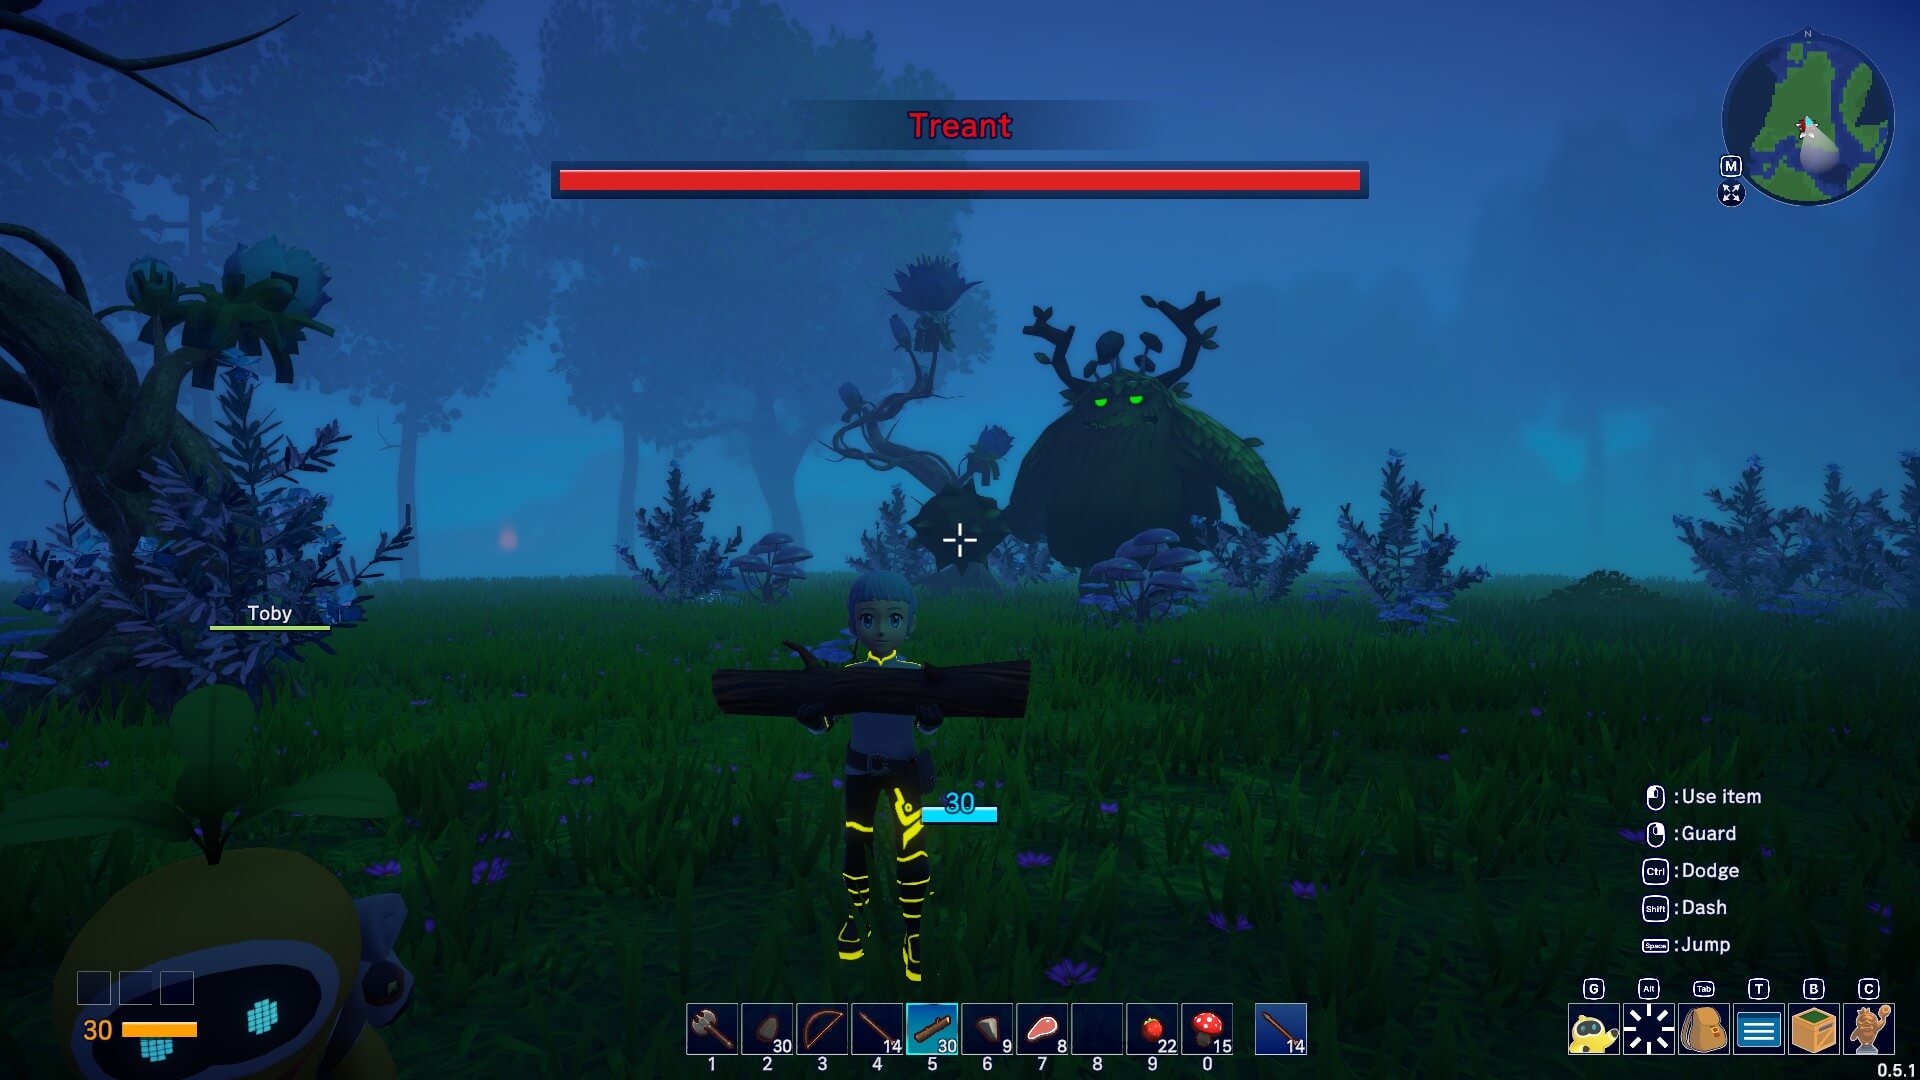 The first main boss of the game - Treant - chasing the player character away from the summoning area.